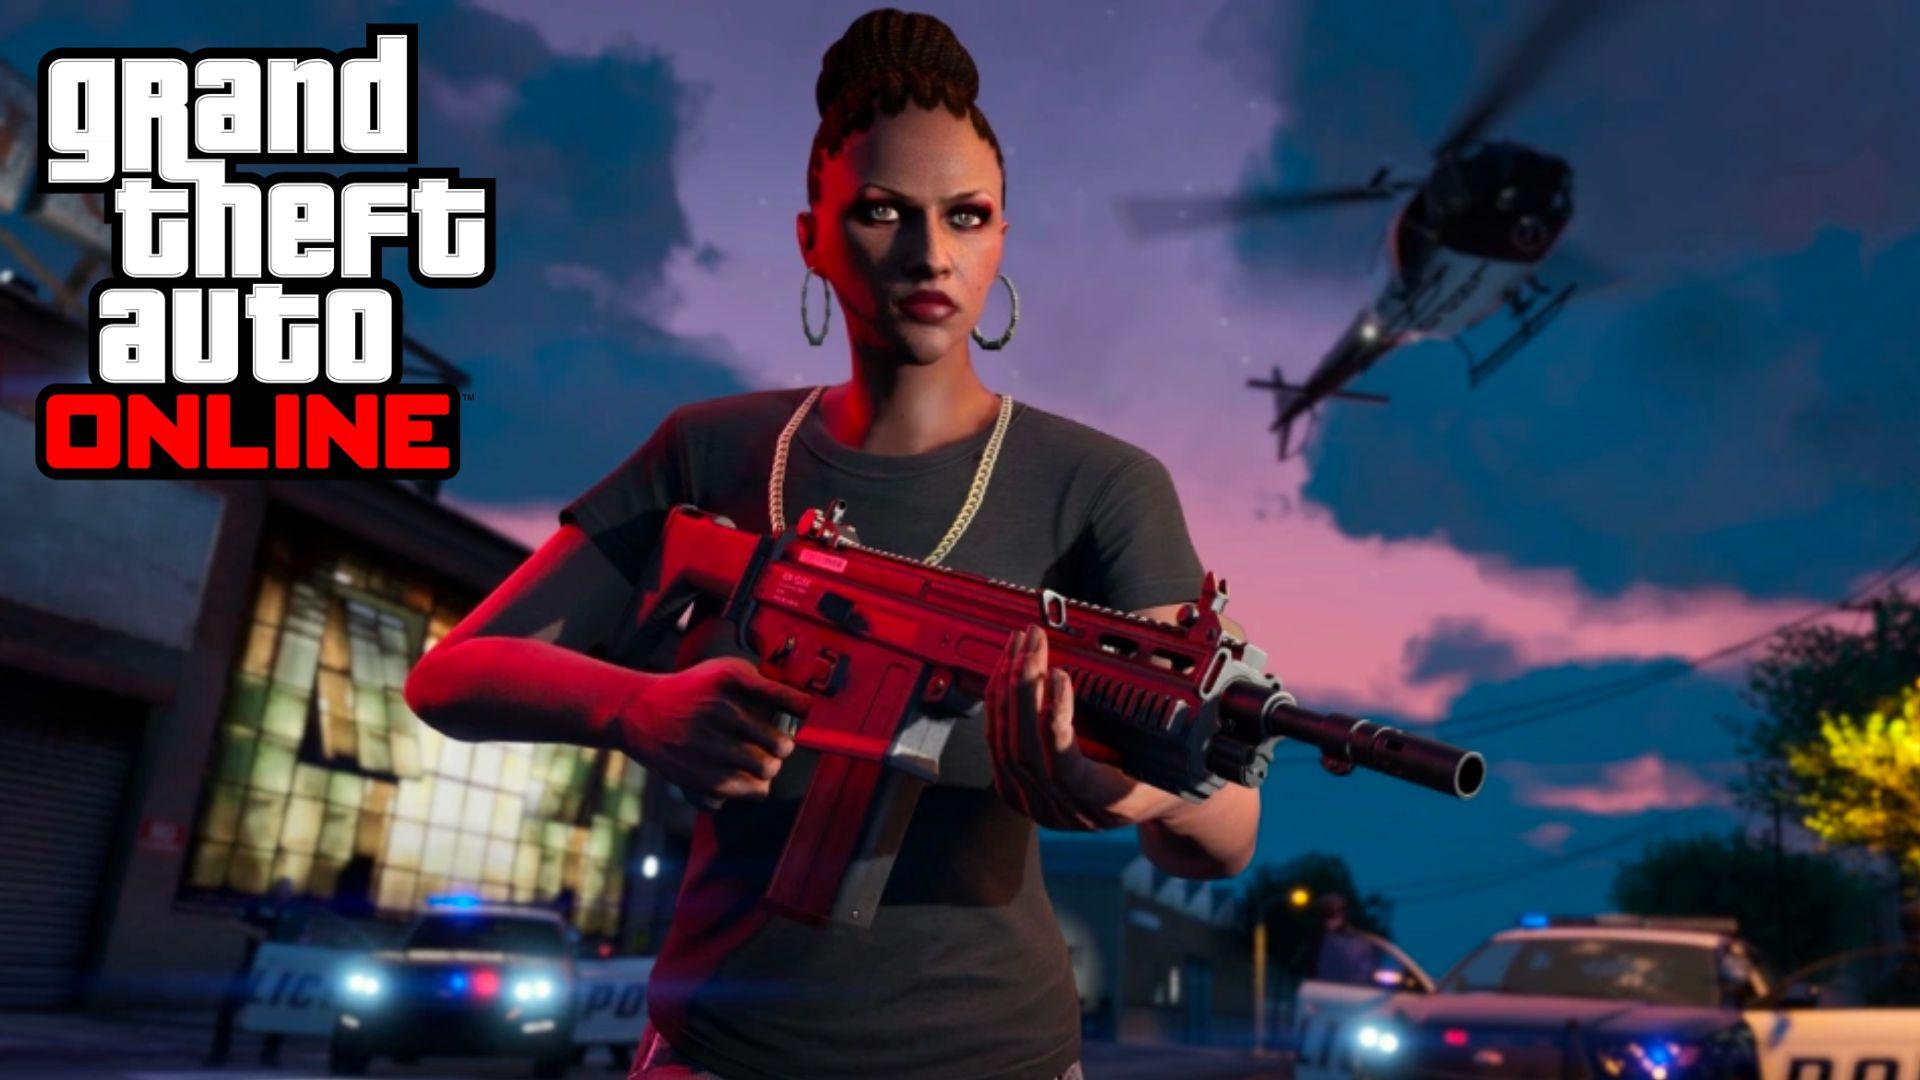 GTA online character running with red gun followed by helicopter